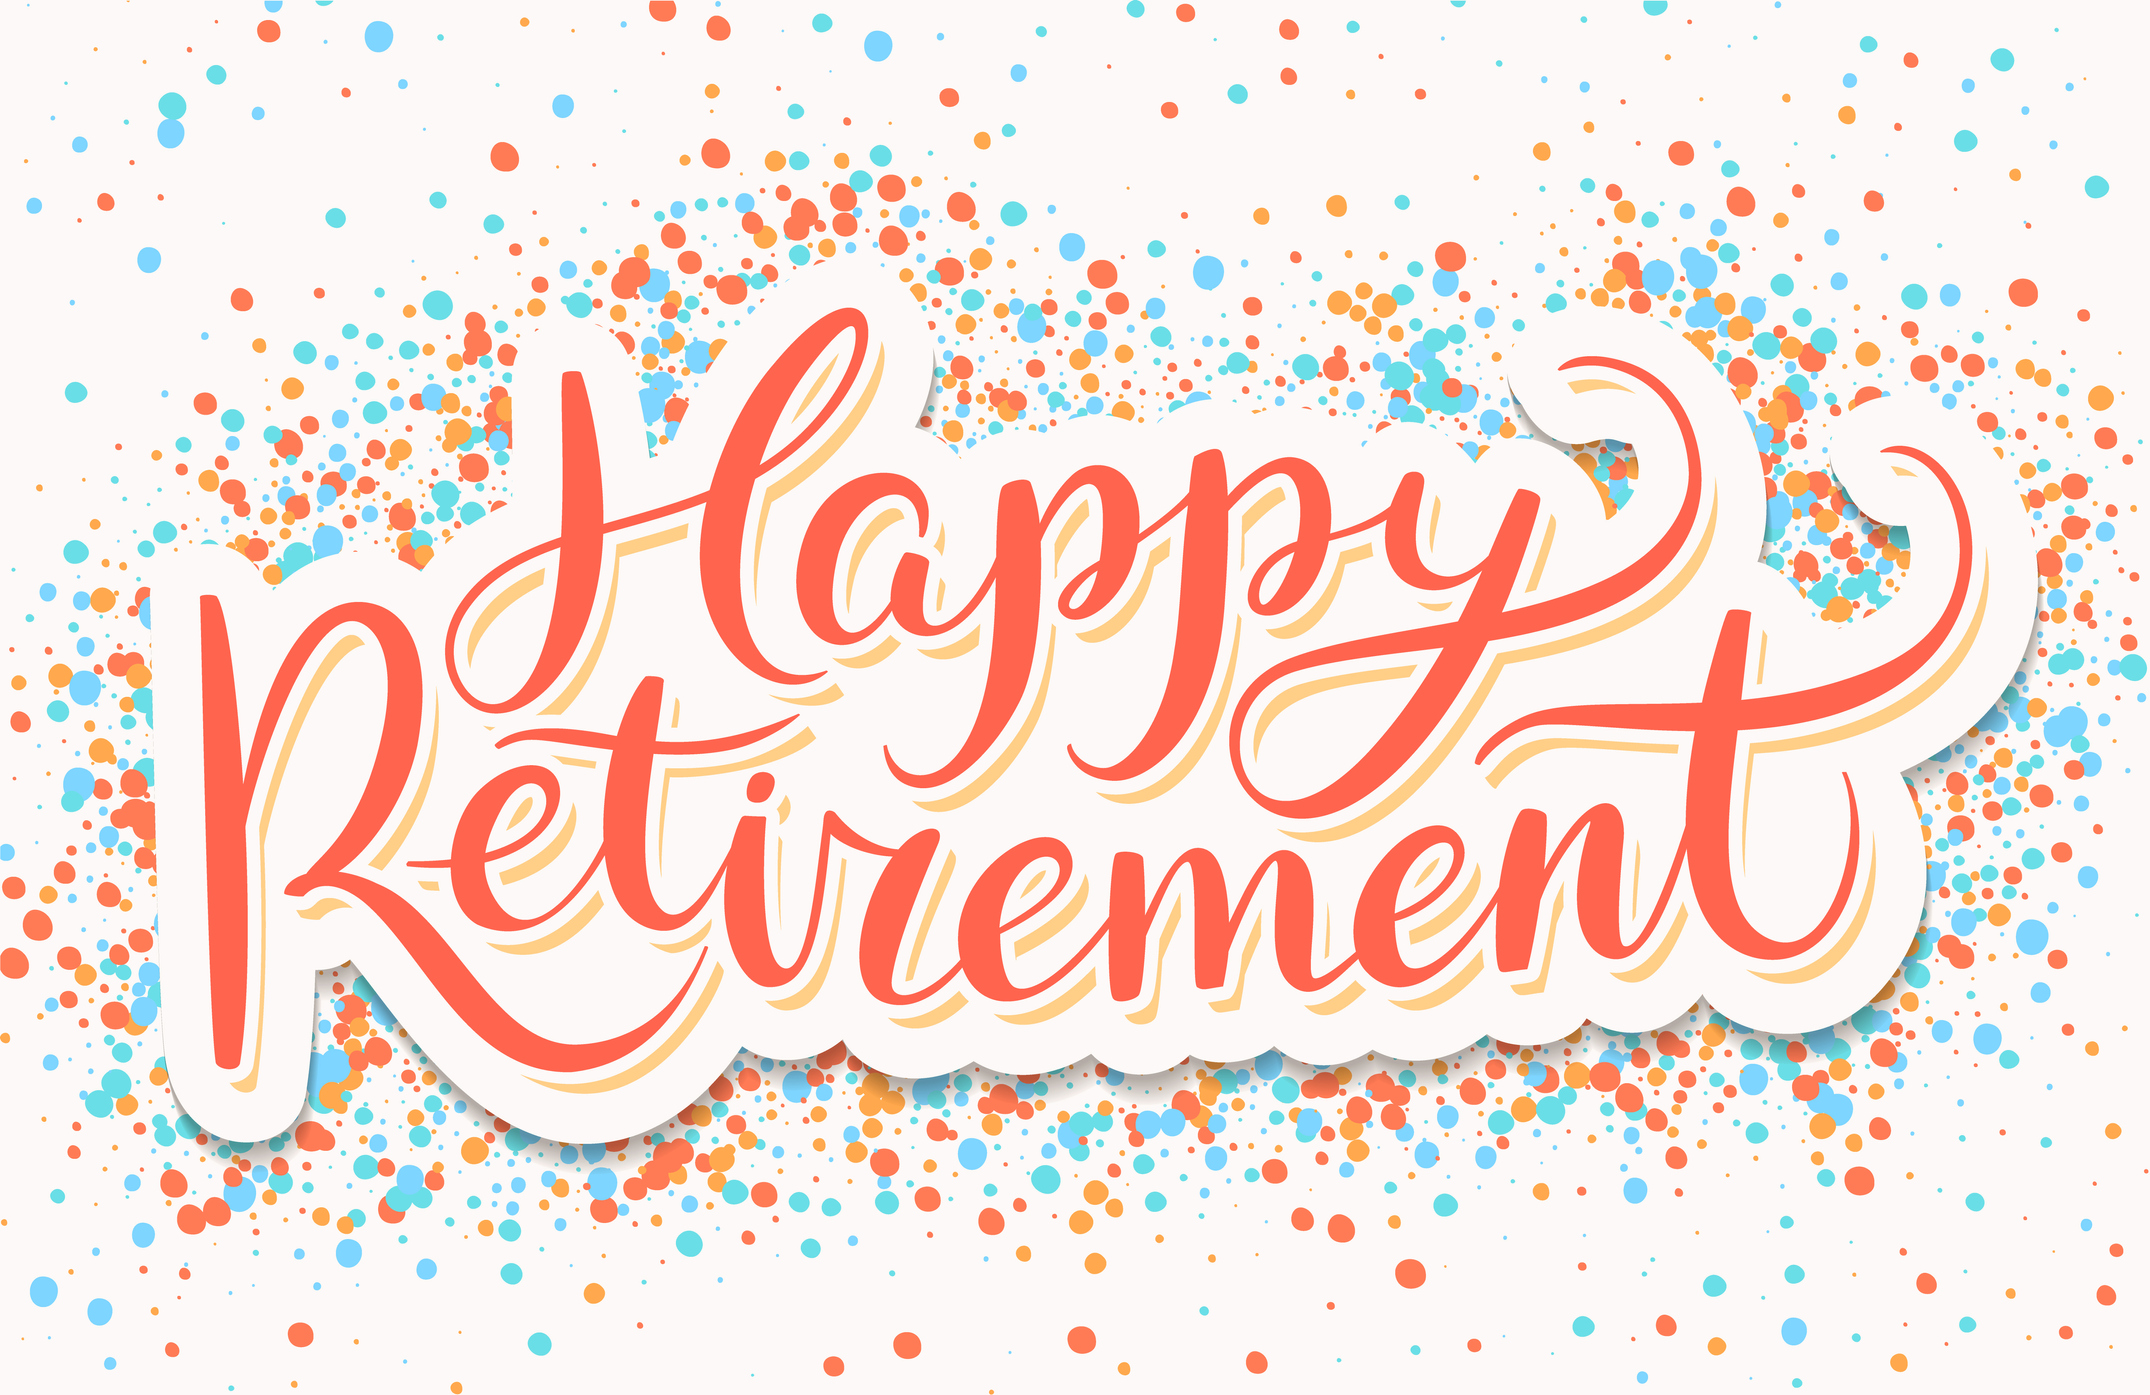 graphic with text stating Happy Retirement surrounded by blue, orange and red confetti